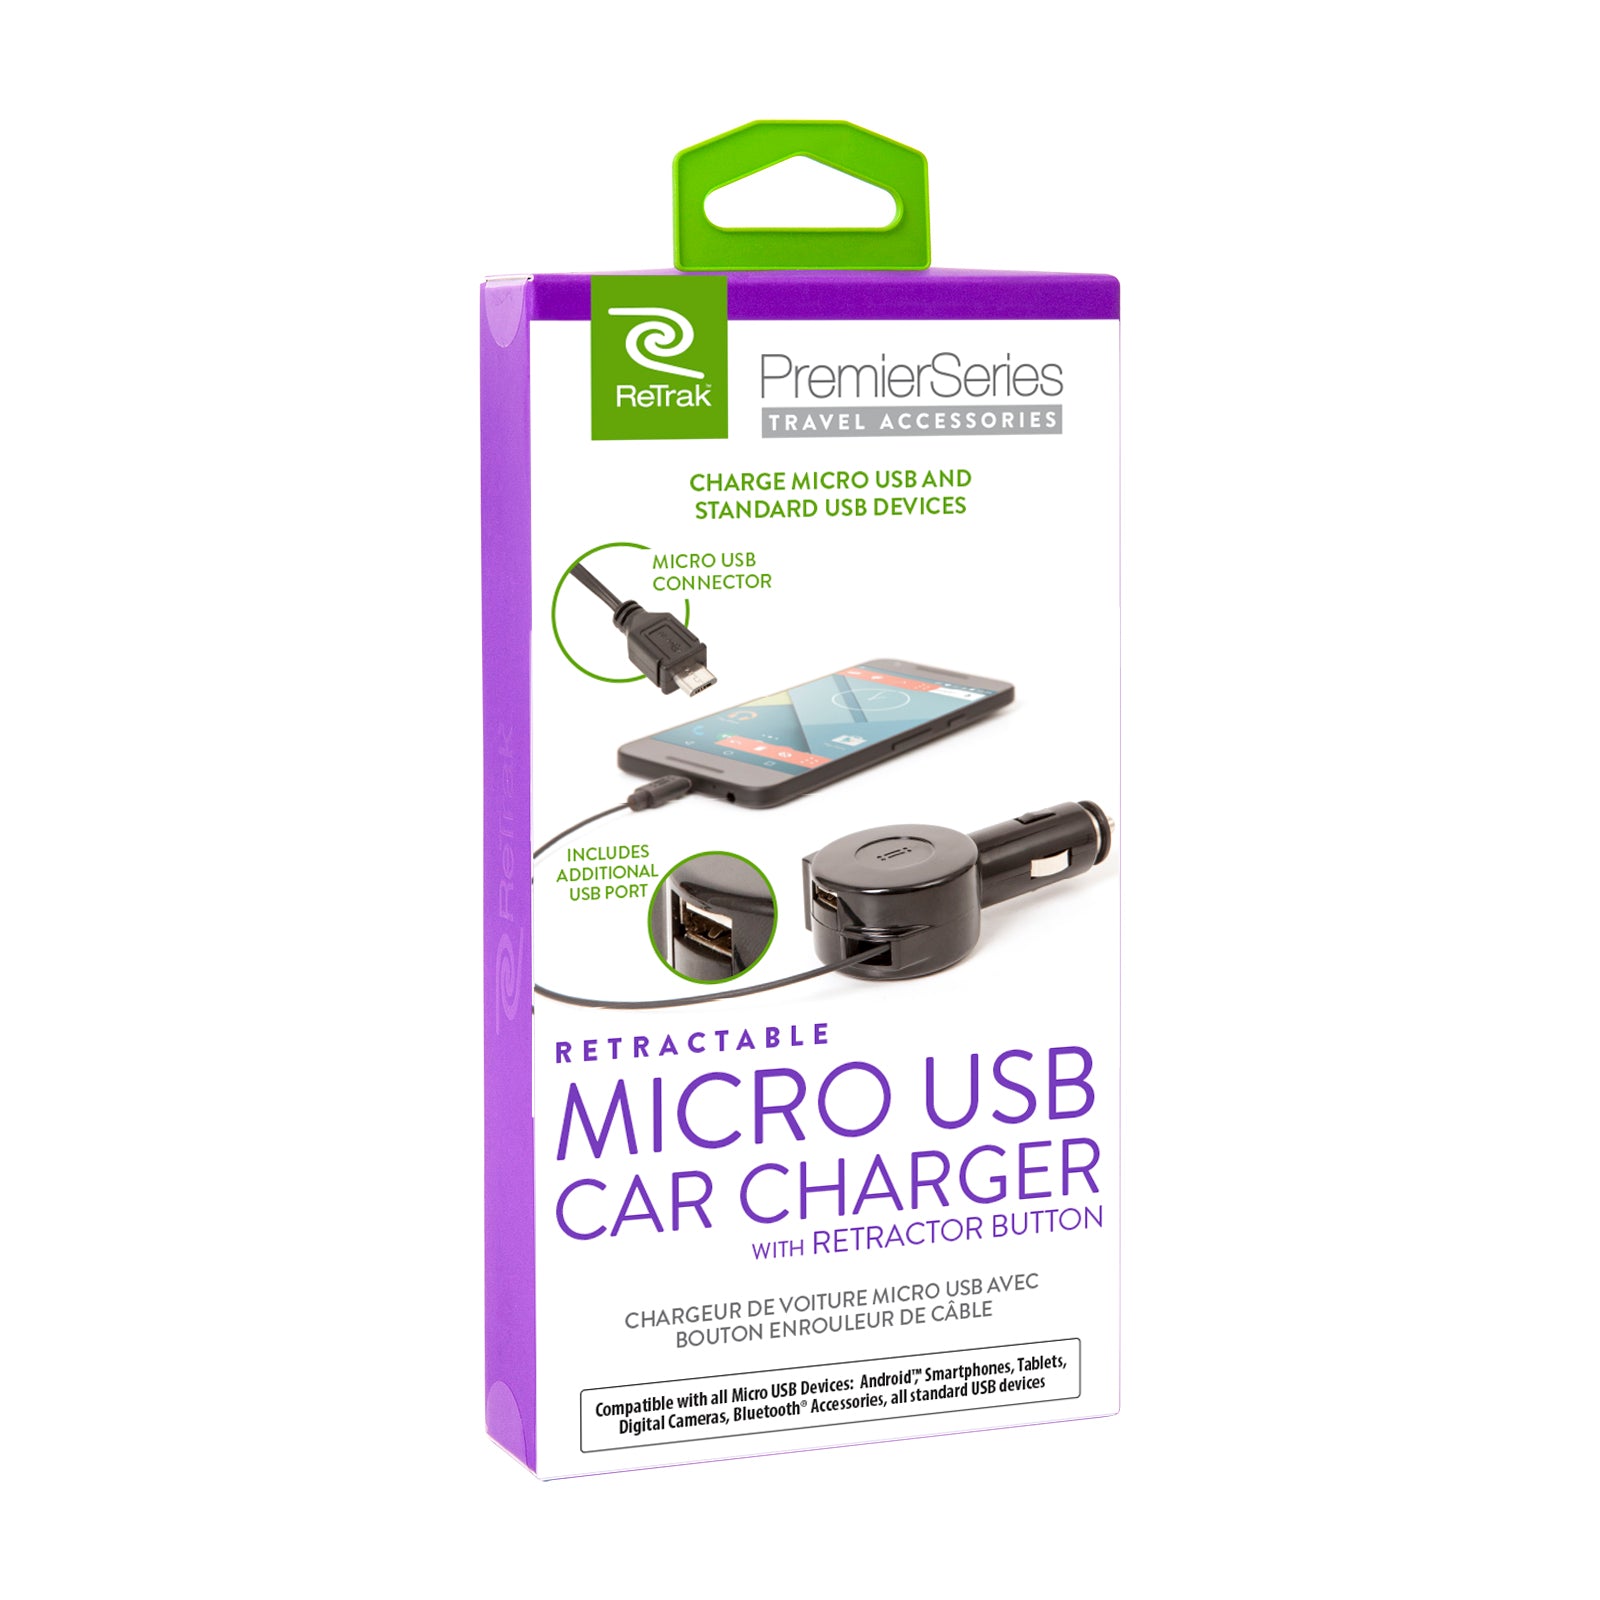 Micro USB Car Charger | Retractable Micro USB Charging Cable